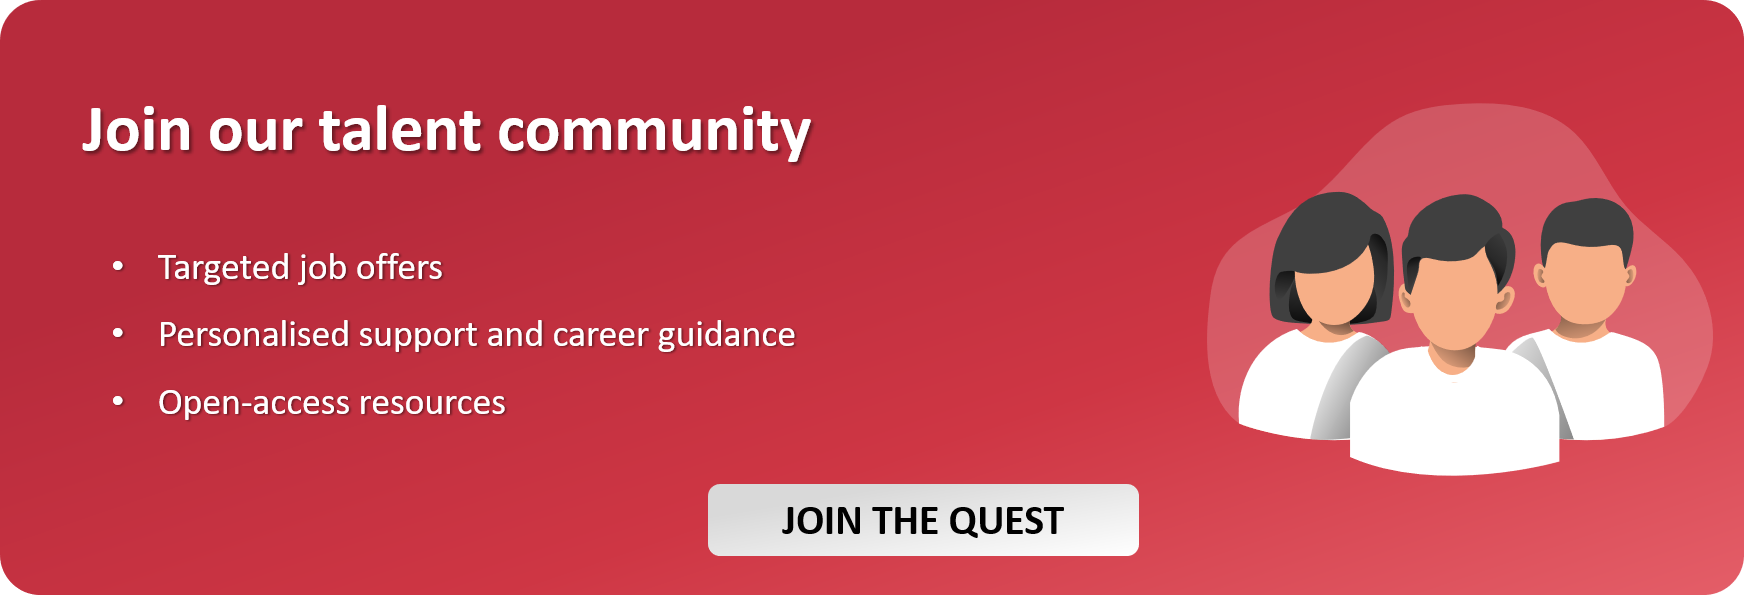 Join our talent community